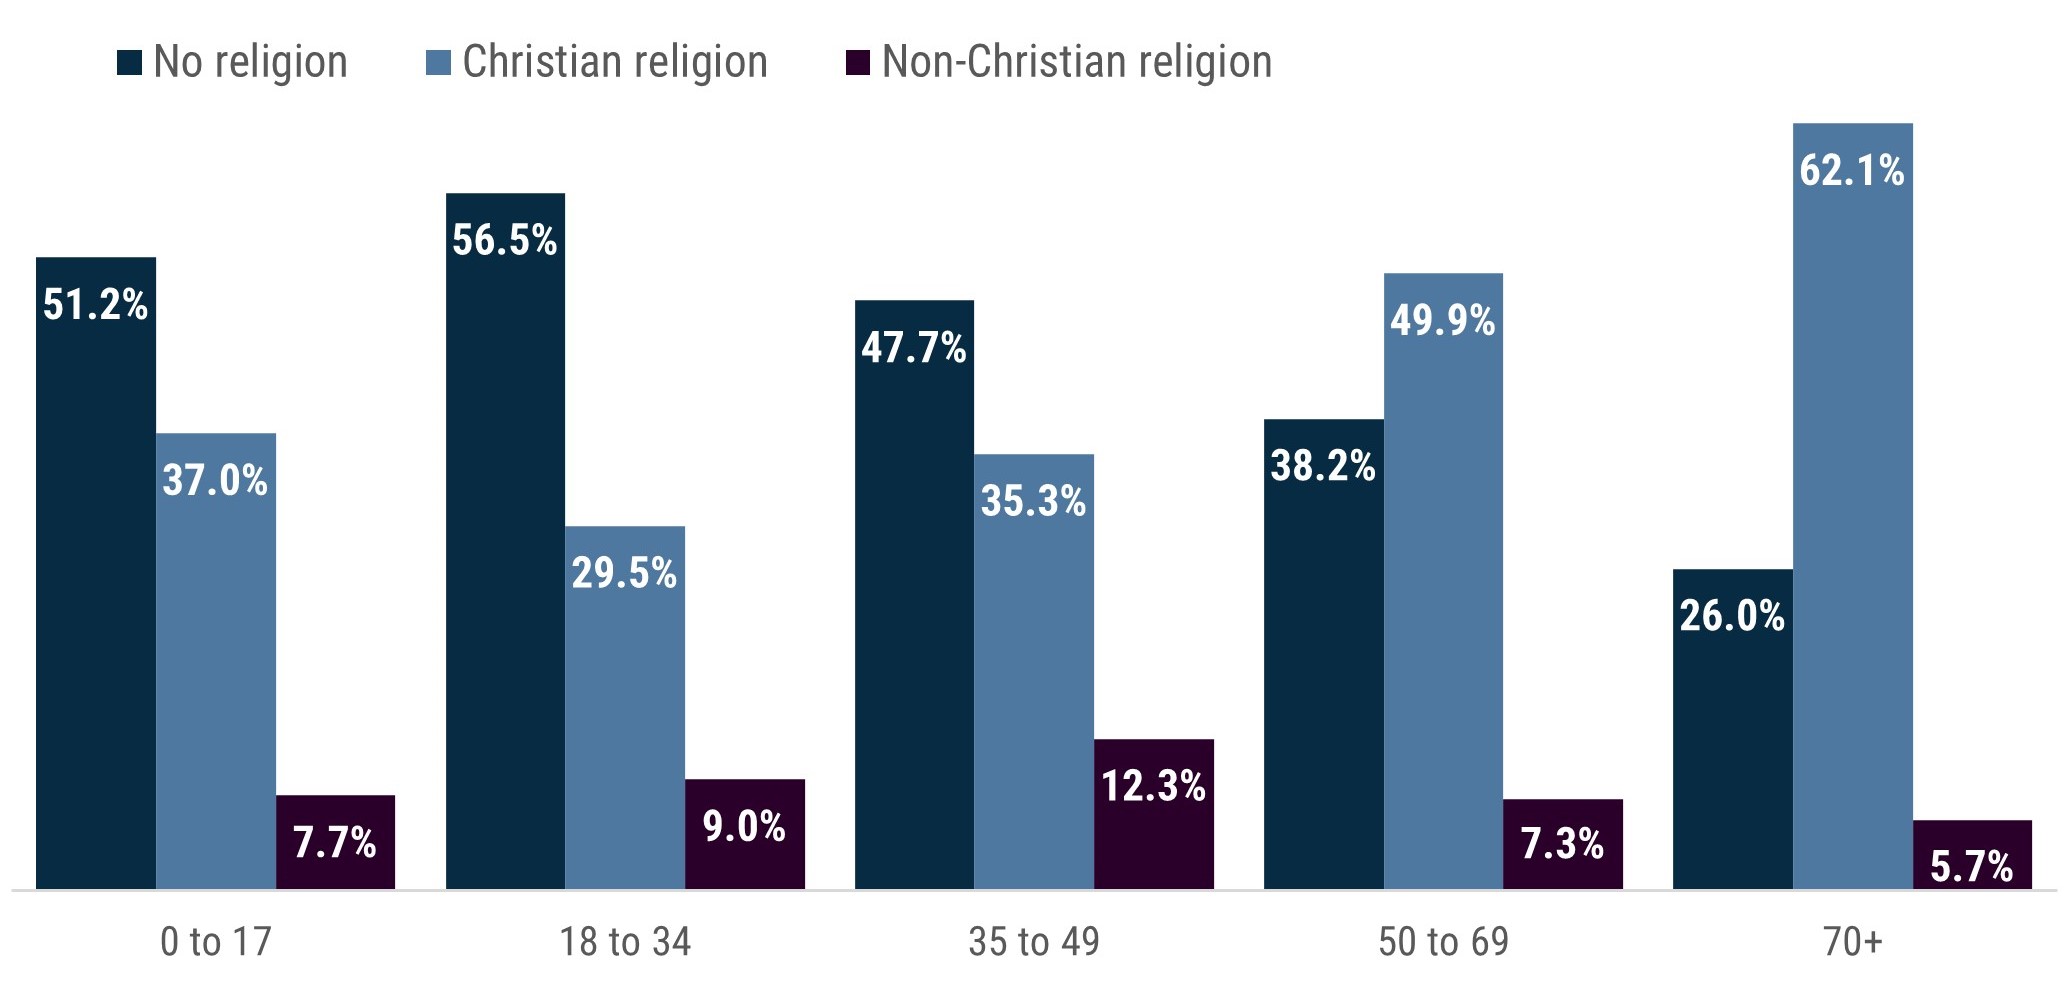 Column chart showing that the proportion of Boroondara residents who report a Christian religion is lowest at 29.5% among people 18 to 34, increasing to 62.1% among people over 69. The proportion who report no religion is highest at 56.5% among Boroondara residents aged 18 to 34 before it drops to 26% among people over 69. The proportion following a non Christian religion peaks among 35 to 49 years olds, at 12.3%. 